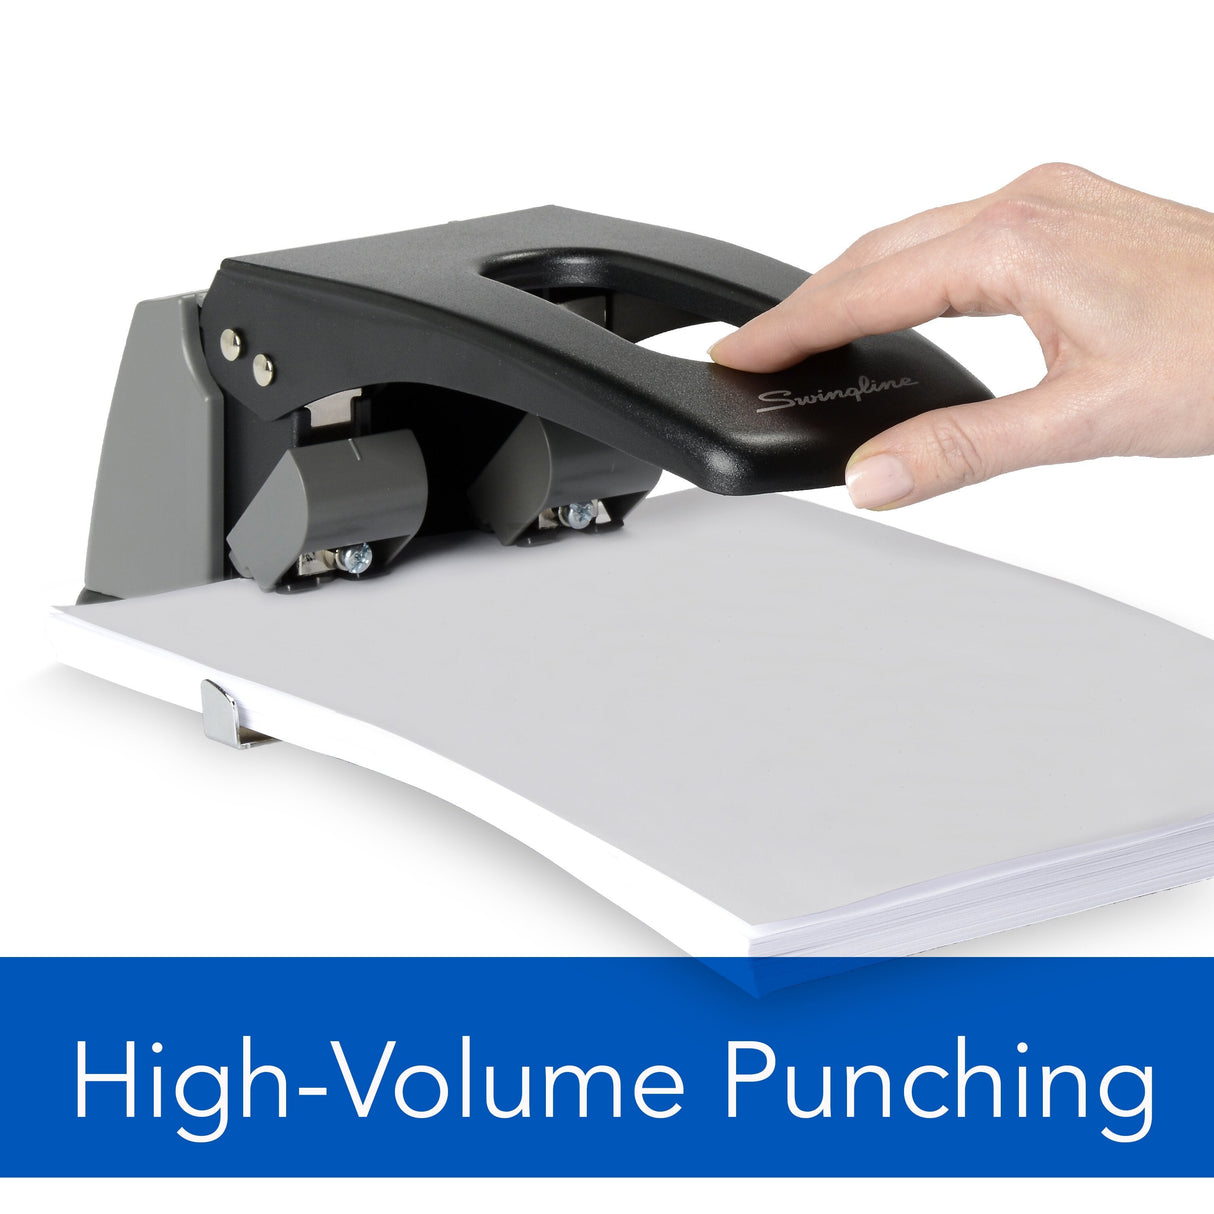 Swingline High Capacity 2-Hole Punch, Fixed Centers, 100 Sheets - Model: SC-200FH-P100